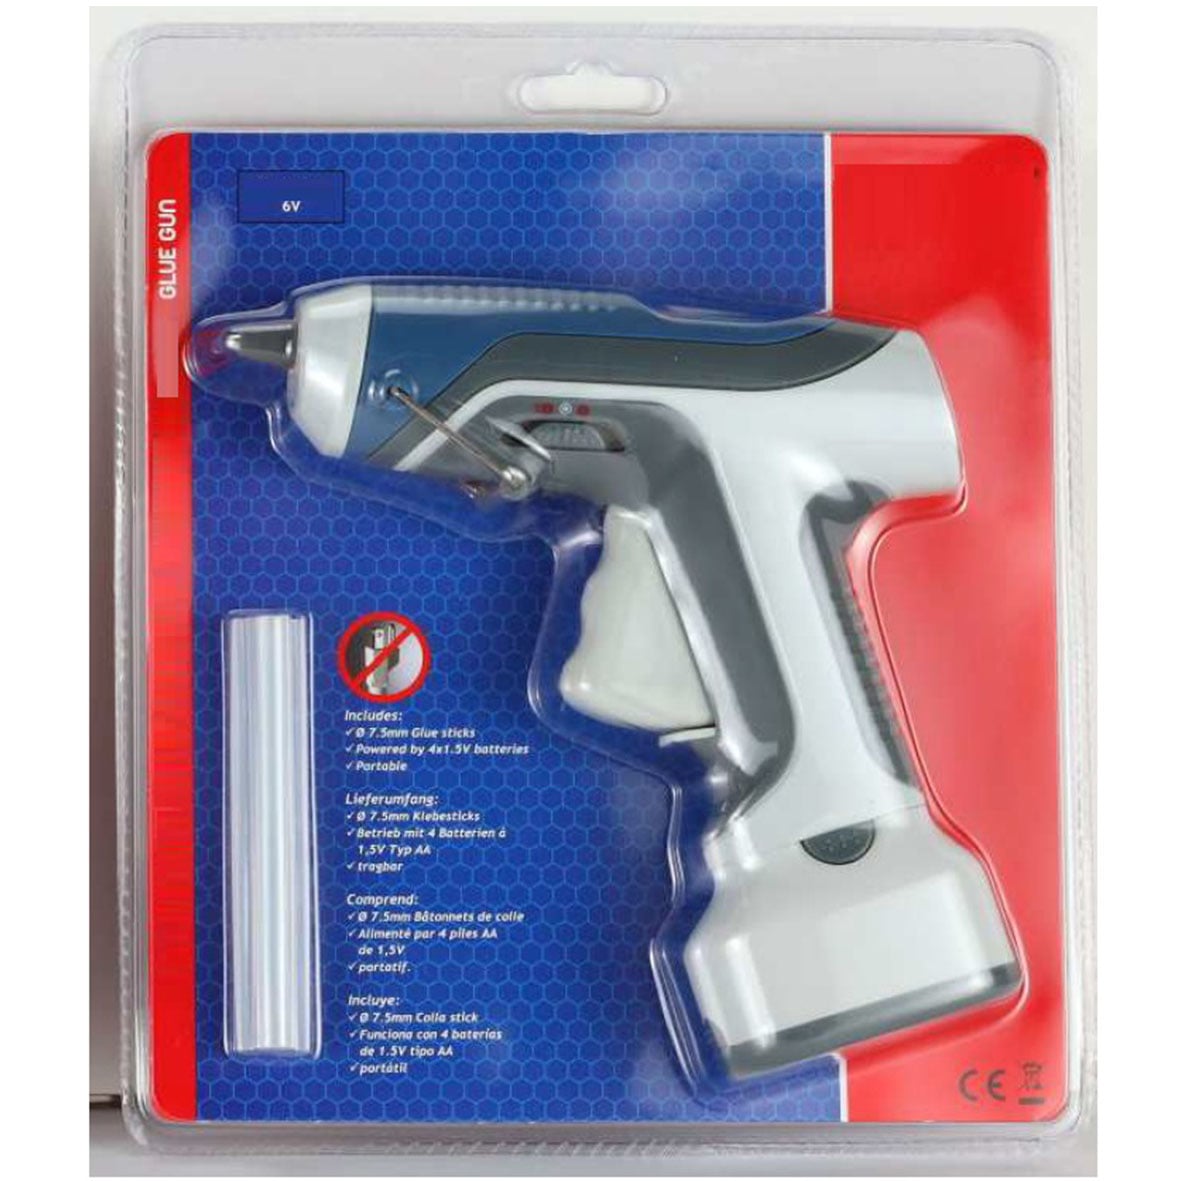 Cordless Glue Gun Battery Operated sold by A-HOT Taiwan Professional Factory in DIY, Repairing and Decorating Hand Craft Tool